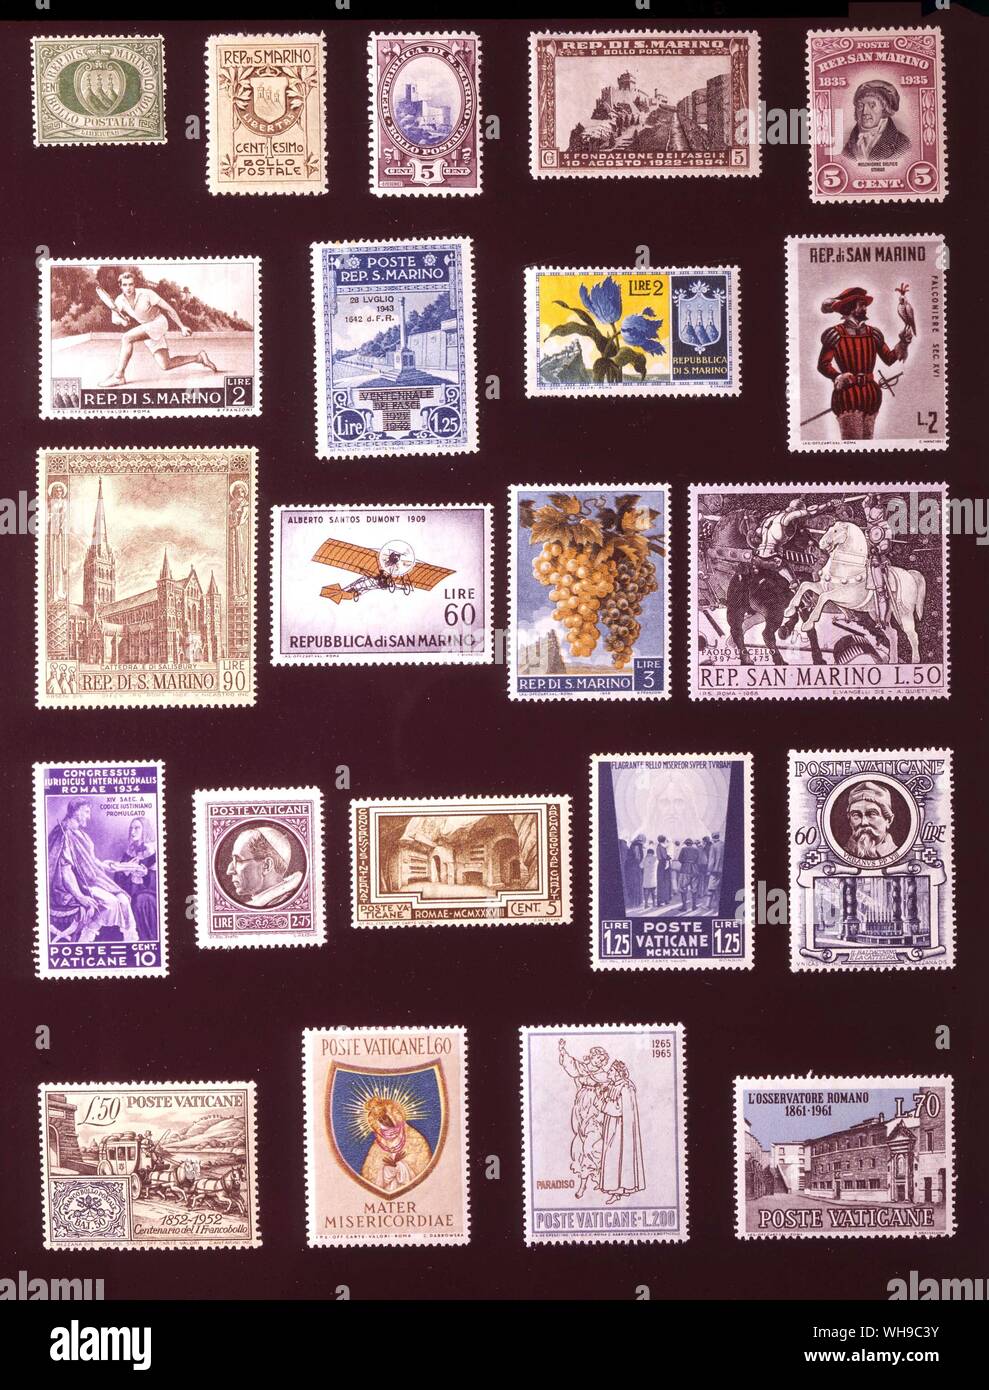 EUROPE - SAN MARINO AND VATICAN: (left to right) 1. San Marino, 5 centesimi, 1892, 2. San Marino, 1 centesimo, 1907, 3. San Marino, 5 centesimi, 1929, 4. San marino, 5 centesimi, 1934, 5. San Marino, 5 centesimi, 1935, 6. San Marino, 2 lire, 1953, 7. San Marino, 1.25 lire, 1953, 8. San Marino, 2 lire, 1953, 9. San Mrino, 2 lire, 1961, 10. San Marino, 90 lire, 1967, 11. San Marino, 60 lire, 1962, 12. San marino, 3 lire, 1958, 13. San Marino, 50 lire, 1968, 14. Vatican, 10 centesimi, 1934, 15. Vatican, 2.75 lire, 1940, 16. Vatican, 5 centesimi, 1938, 17. Vatican, 1.25 lire, 1943, 18. Vatican, Stock Photo